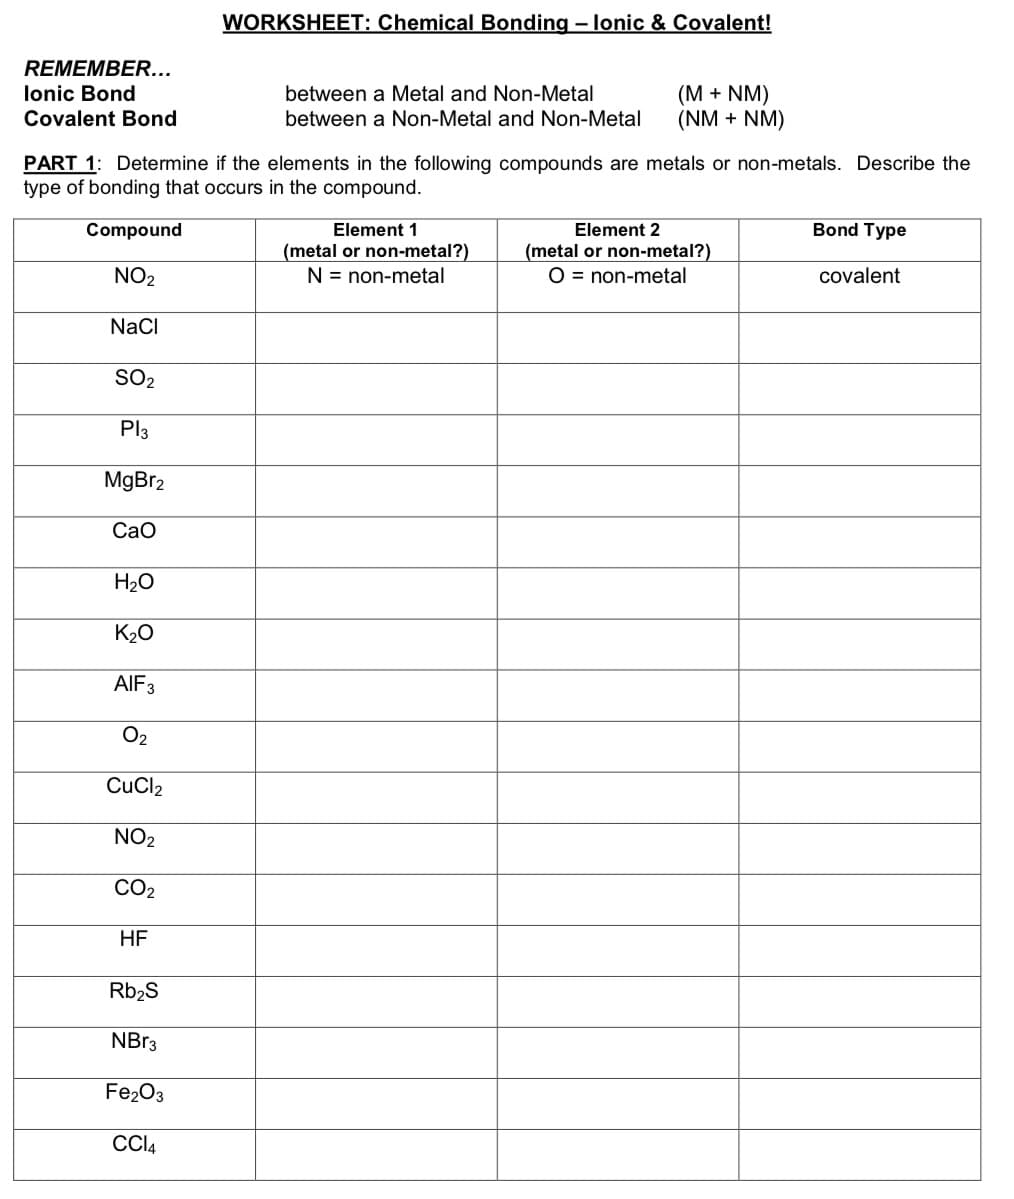 WORKSHEET: Chemical Bonding – lonic & Covalent!
REMEMBER...
lonic Bond
between a Metal and Non-Metal
(M + NM)
(NM + NM)
Covalent Bond
between a Non-Metal and Non-Metal
PART 1: Determine if the elements in the following compounds are metals or non-metals. Describe the
type of bonding that occurs in the compound.
Compound
Element 1
Element 2
Bond Type
(metal or non-metal?)
N = non-metal
(metal or non-metal?)
O = non-metal
NO2
covalent
NaCl
SO2
Pl3
MgBr2
Сао
H20
K20
AIF3
O2
CuCl2
NO2
CO2
HF
Rb2S
NBR3
Fe203
CI4
